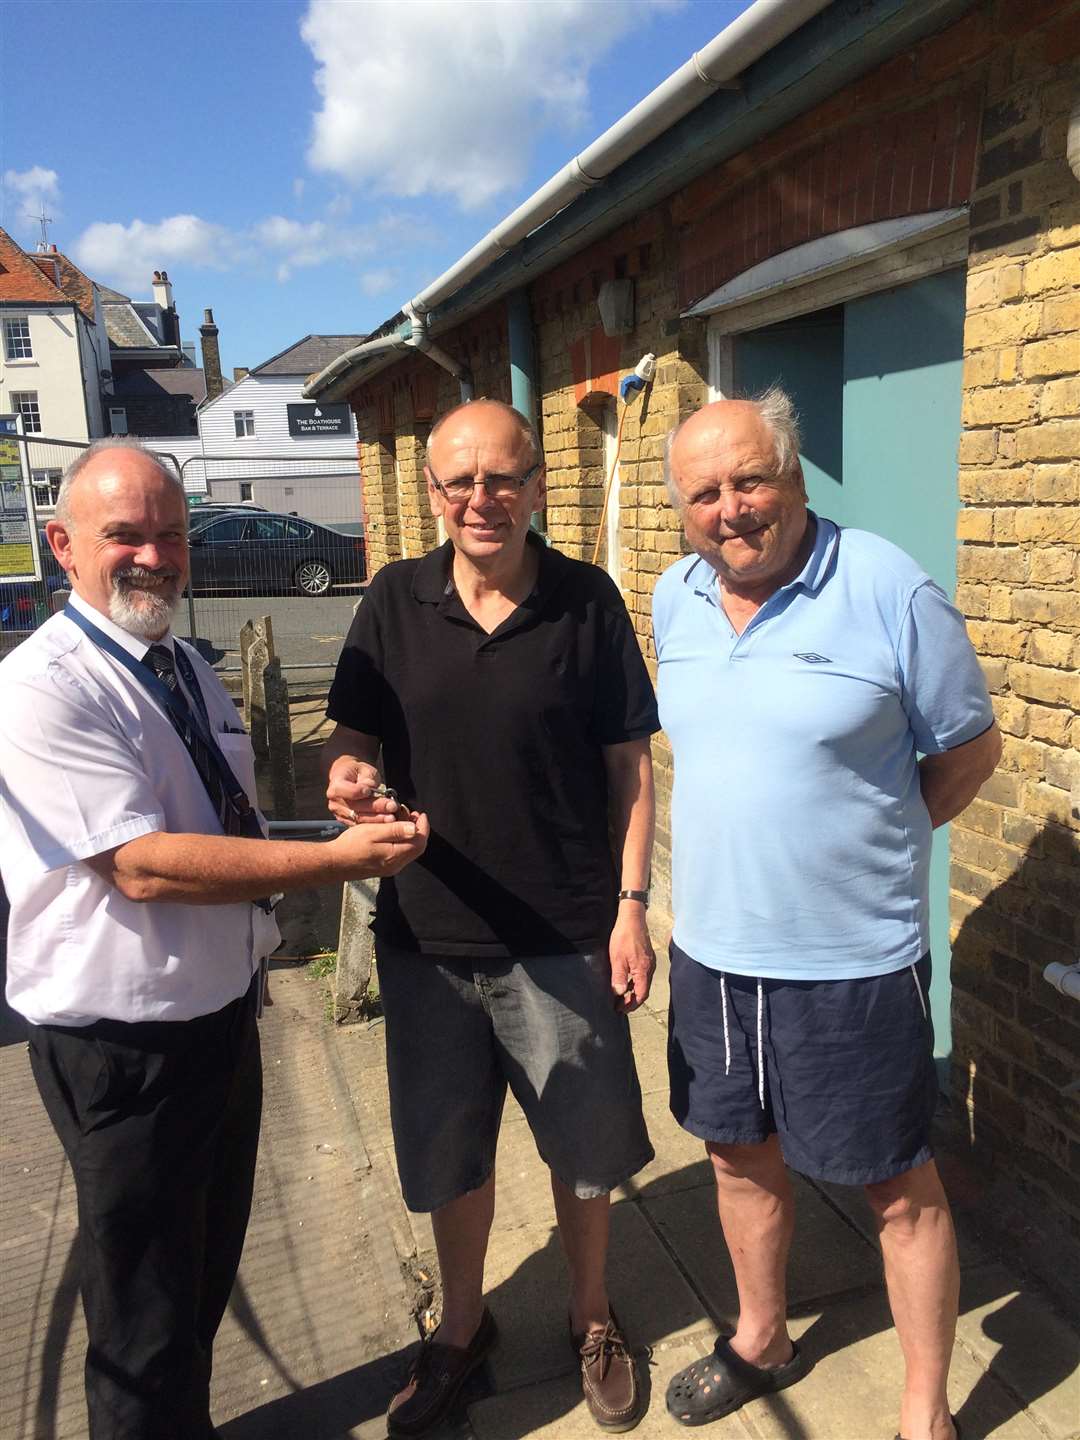 Rob Reid-Easton, Estate Valuation Manager, Dover District Council, Nick Stevens, Route 1 consortium, seafood stall holder Dave Harris.